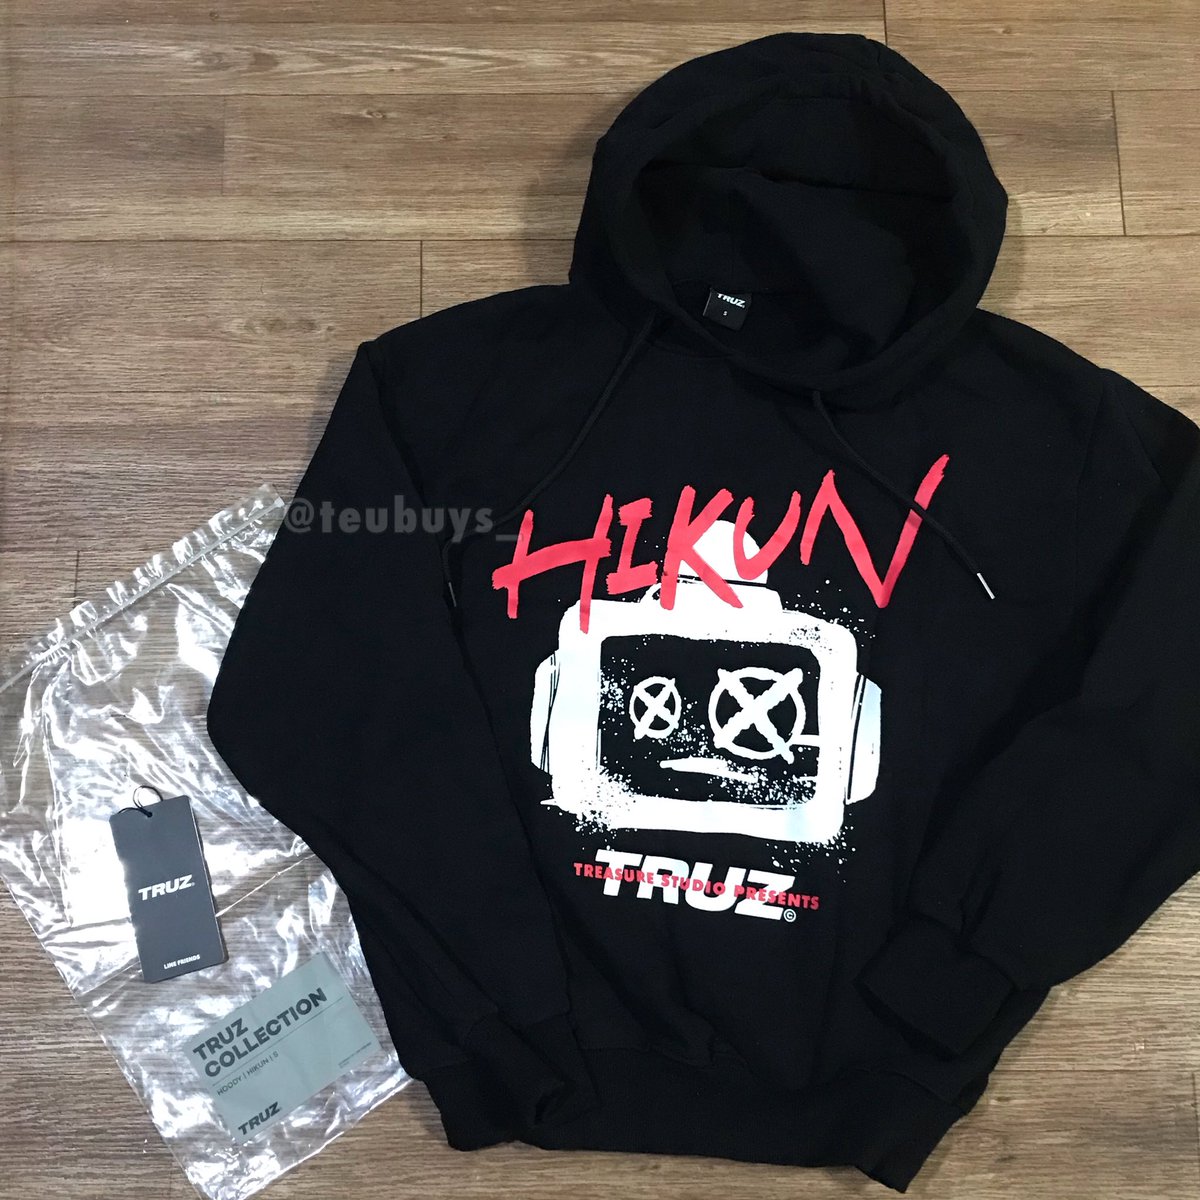 WTS LFB PH onhand Truz Hikun Hoodie - ₱1999 payo - size: SMALL - preowned but this was only worn once for fitting 🥹 then just stored in the closet na for so long - tags & plastic will be shipped together